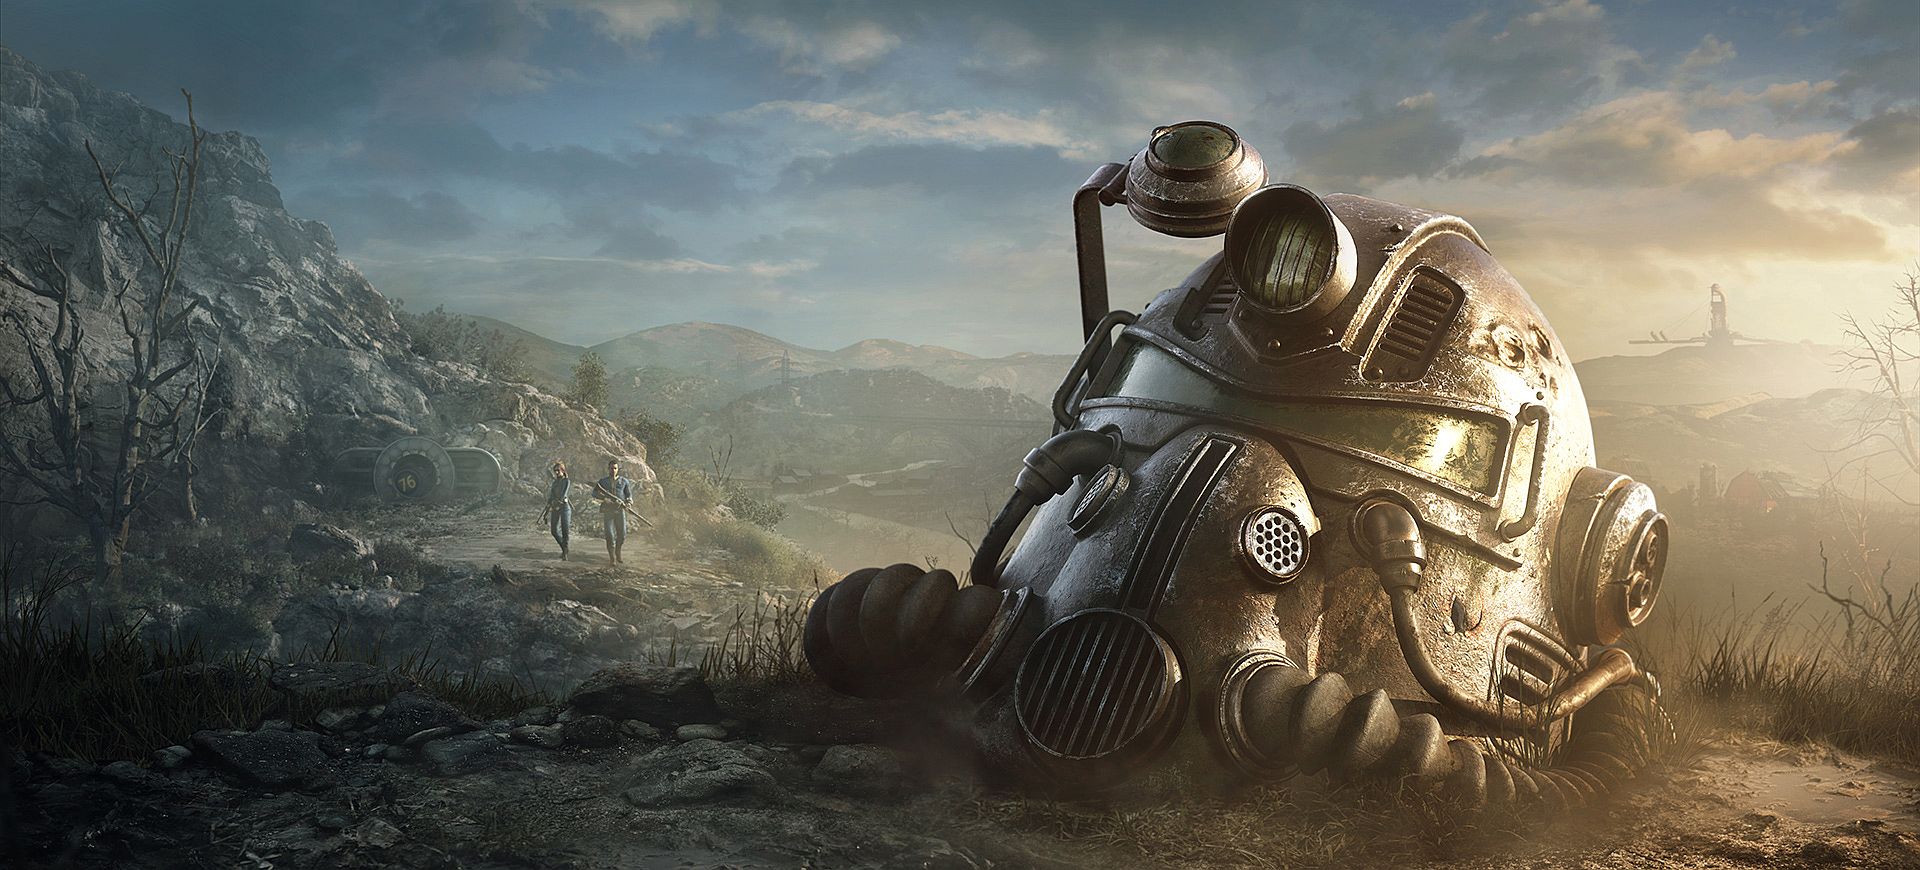 Fallout 76 BETA is the full game!